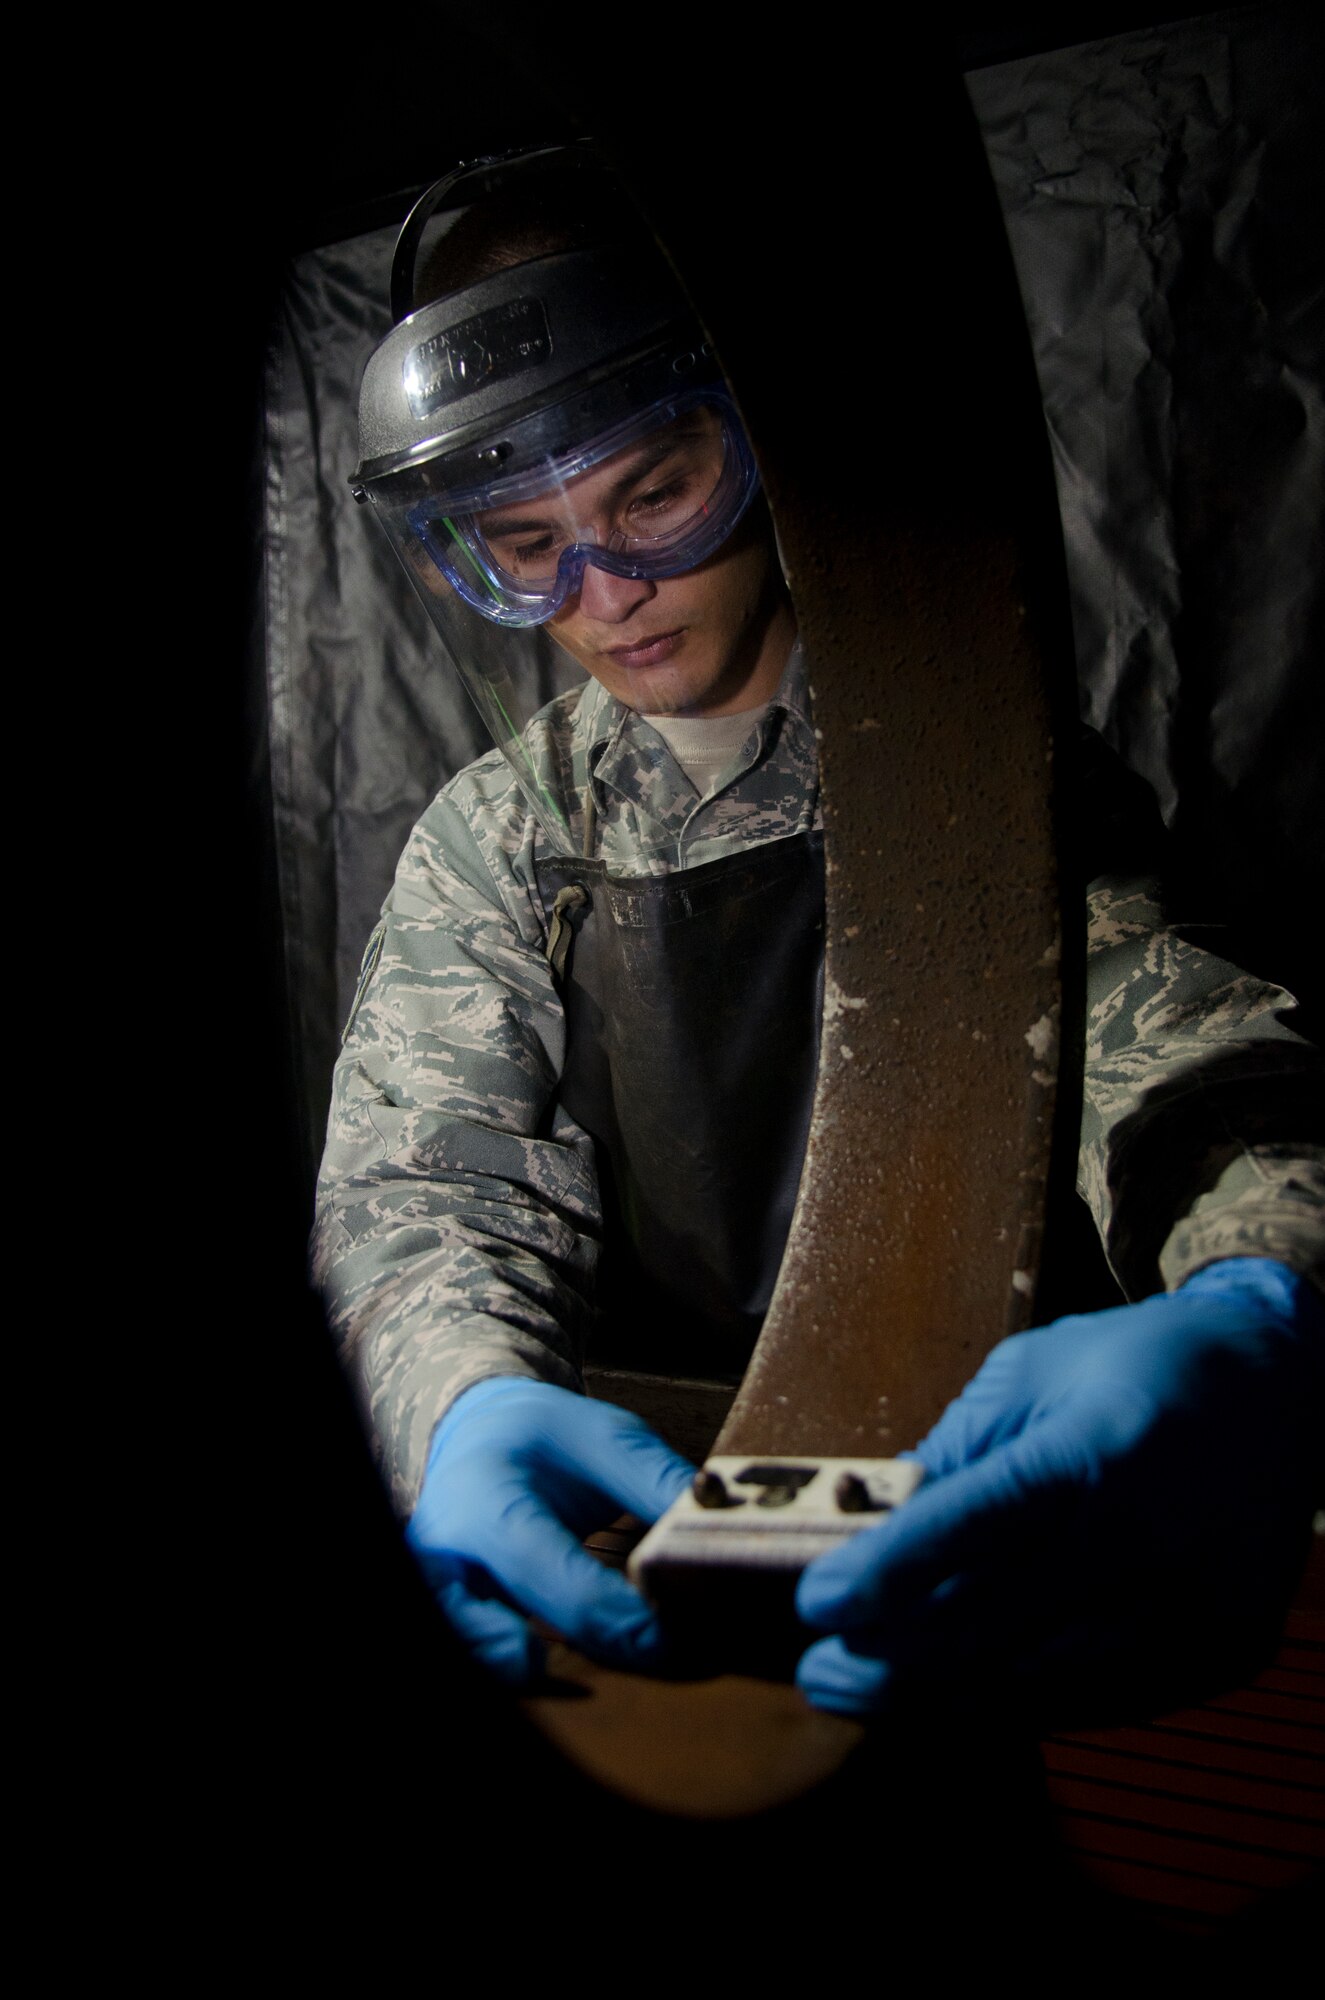 Airman 1st Class Ashton Surber, 36th Maintenance Squadron non-destructive inspection journeyman, uses a magnetic particle machine to search for defects during an aircraft part inspection  Aug. 21, 2014, on Andersen Air Force Base, Guam. NDI Airmen provide support to the structural maintenance program, which ensures air and space equipment are safe, serviceable and in mission-ready condition. (U.S. Air Force photo by Senior Airman Katrina M. Brisbin/Released)